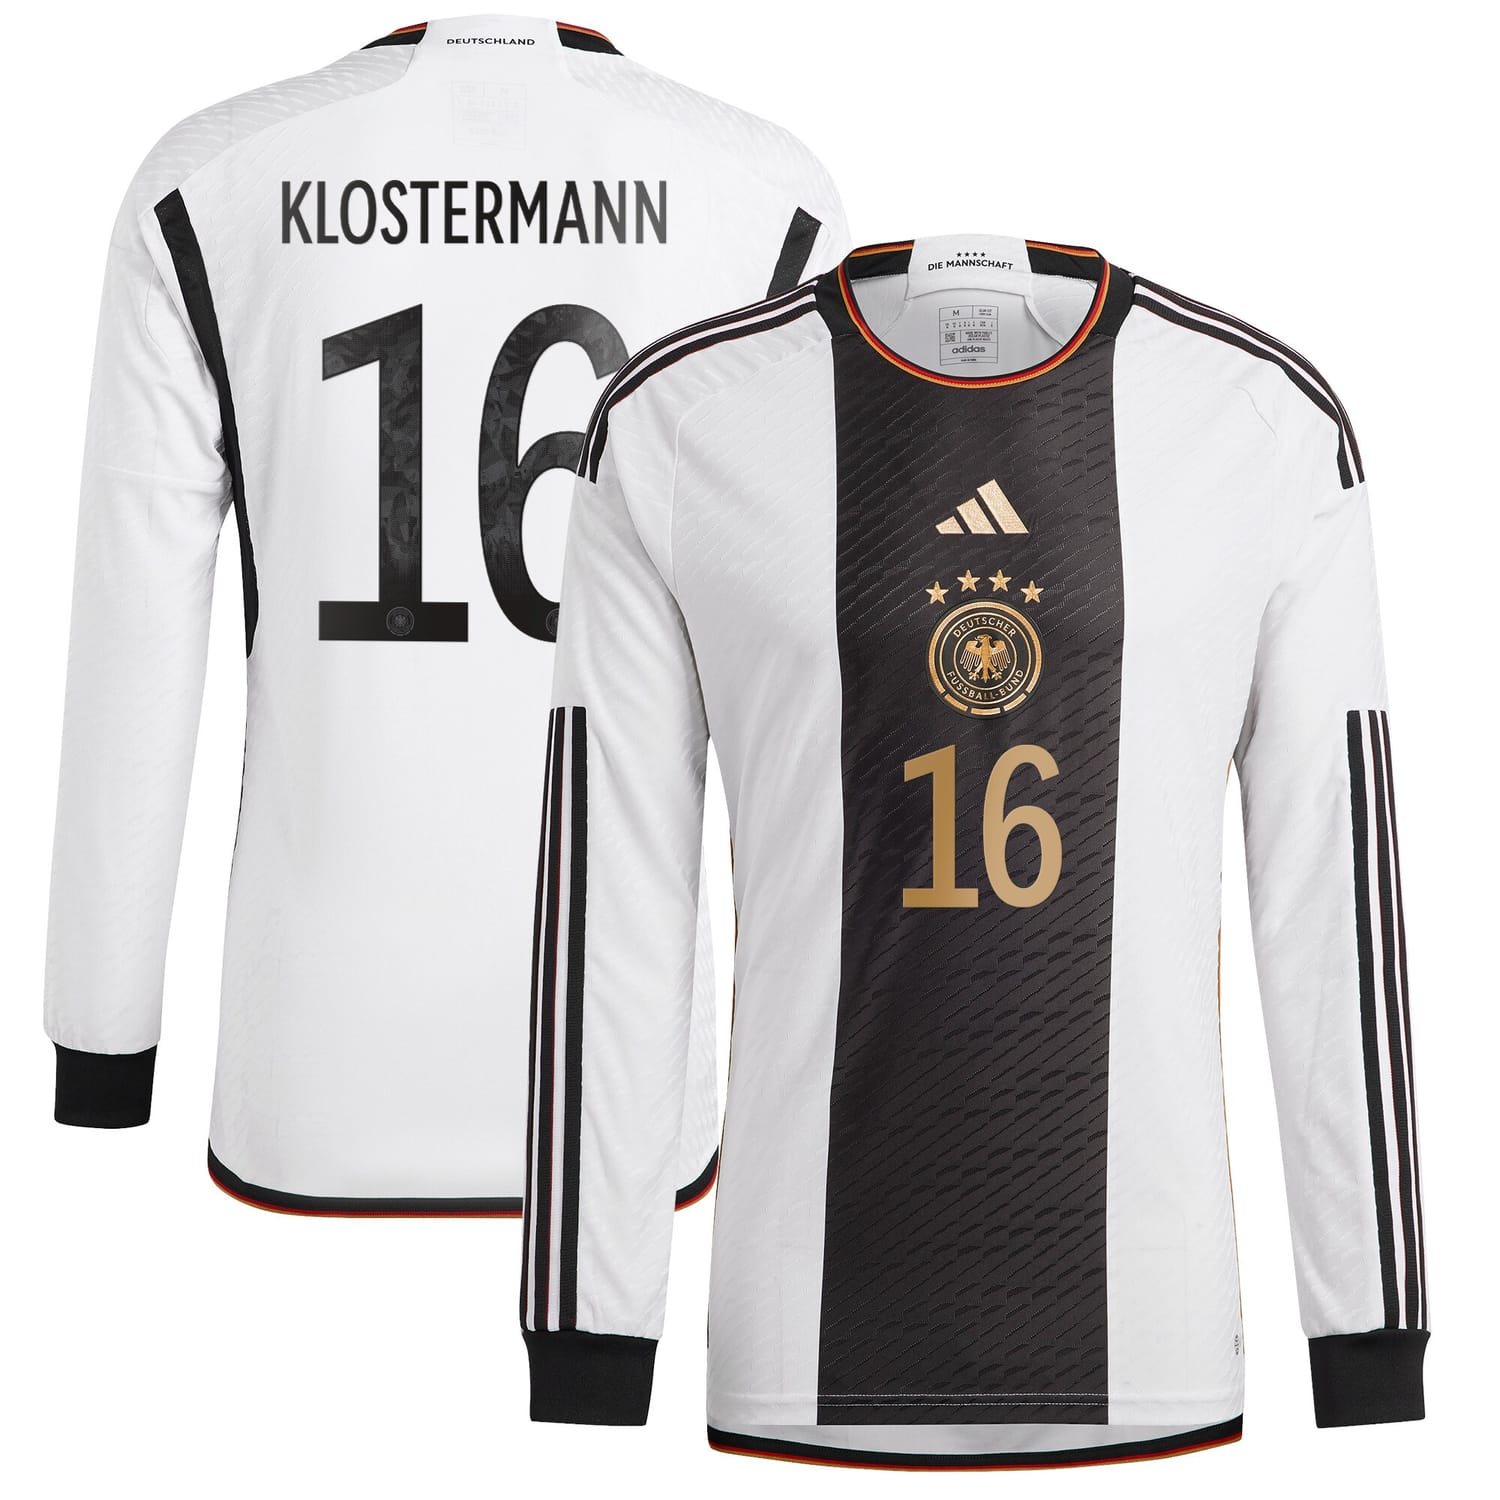 Germany National Team Home Authentic Jersey Shirt Long Sleeve player Lukas Klostermann 16 printing for Men